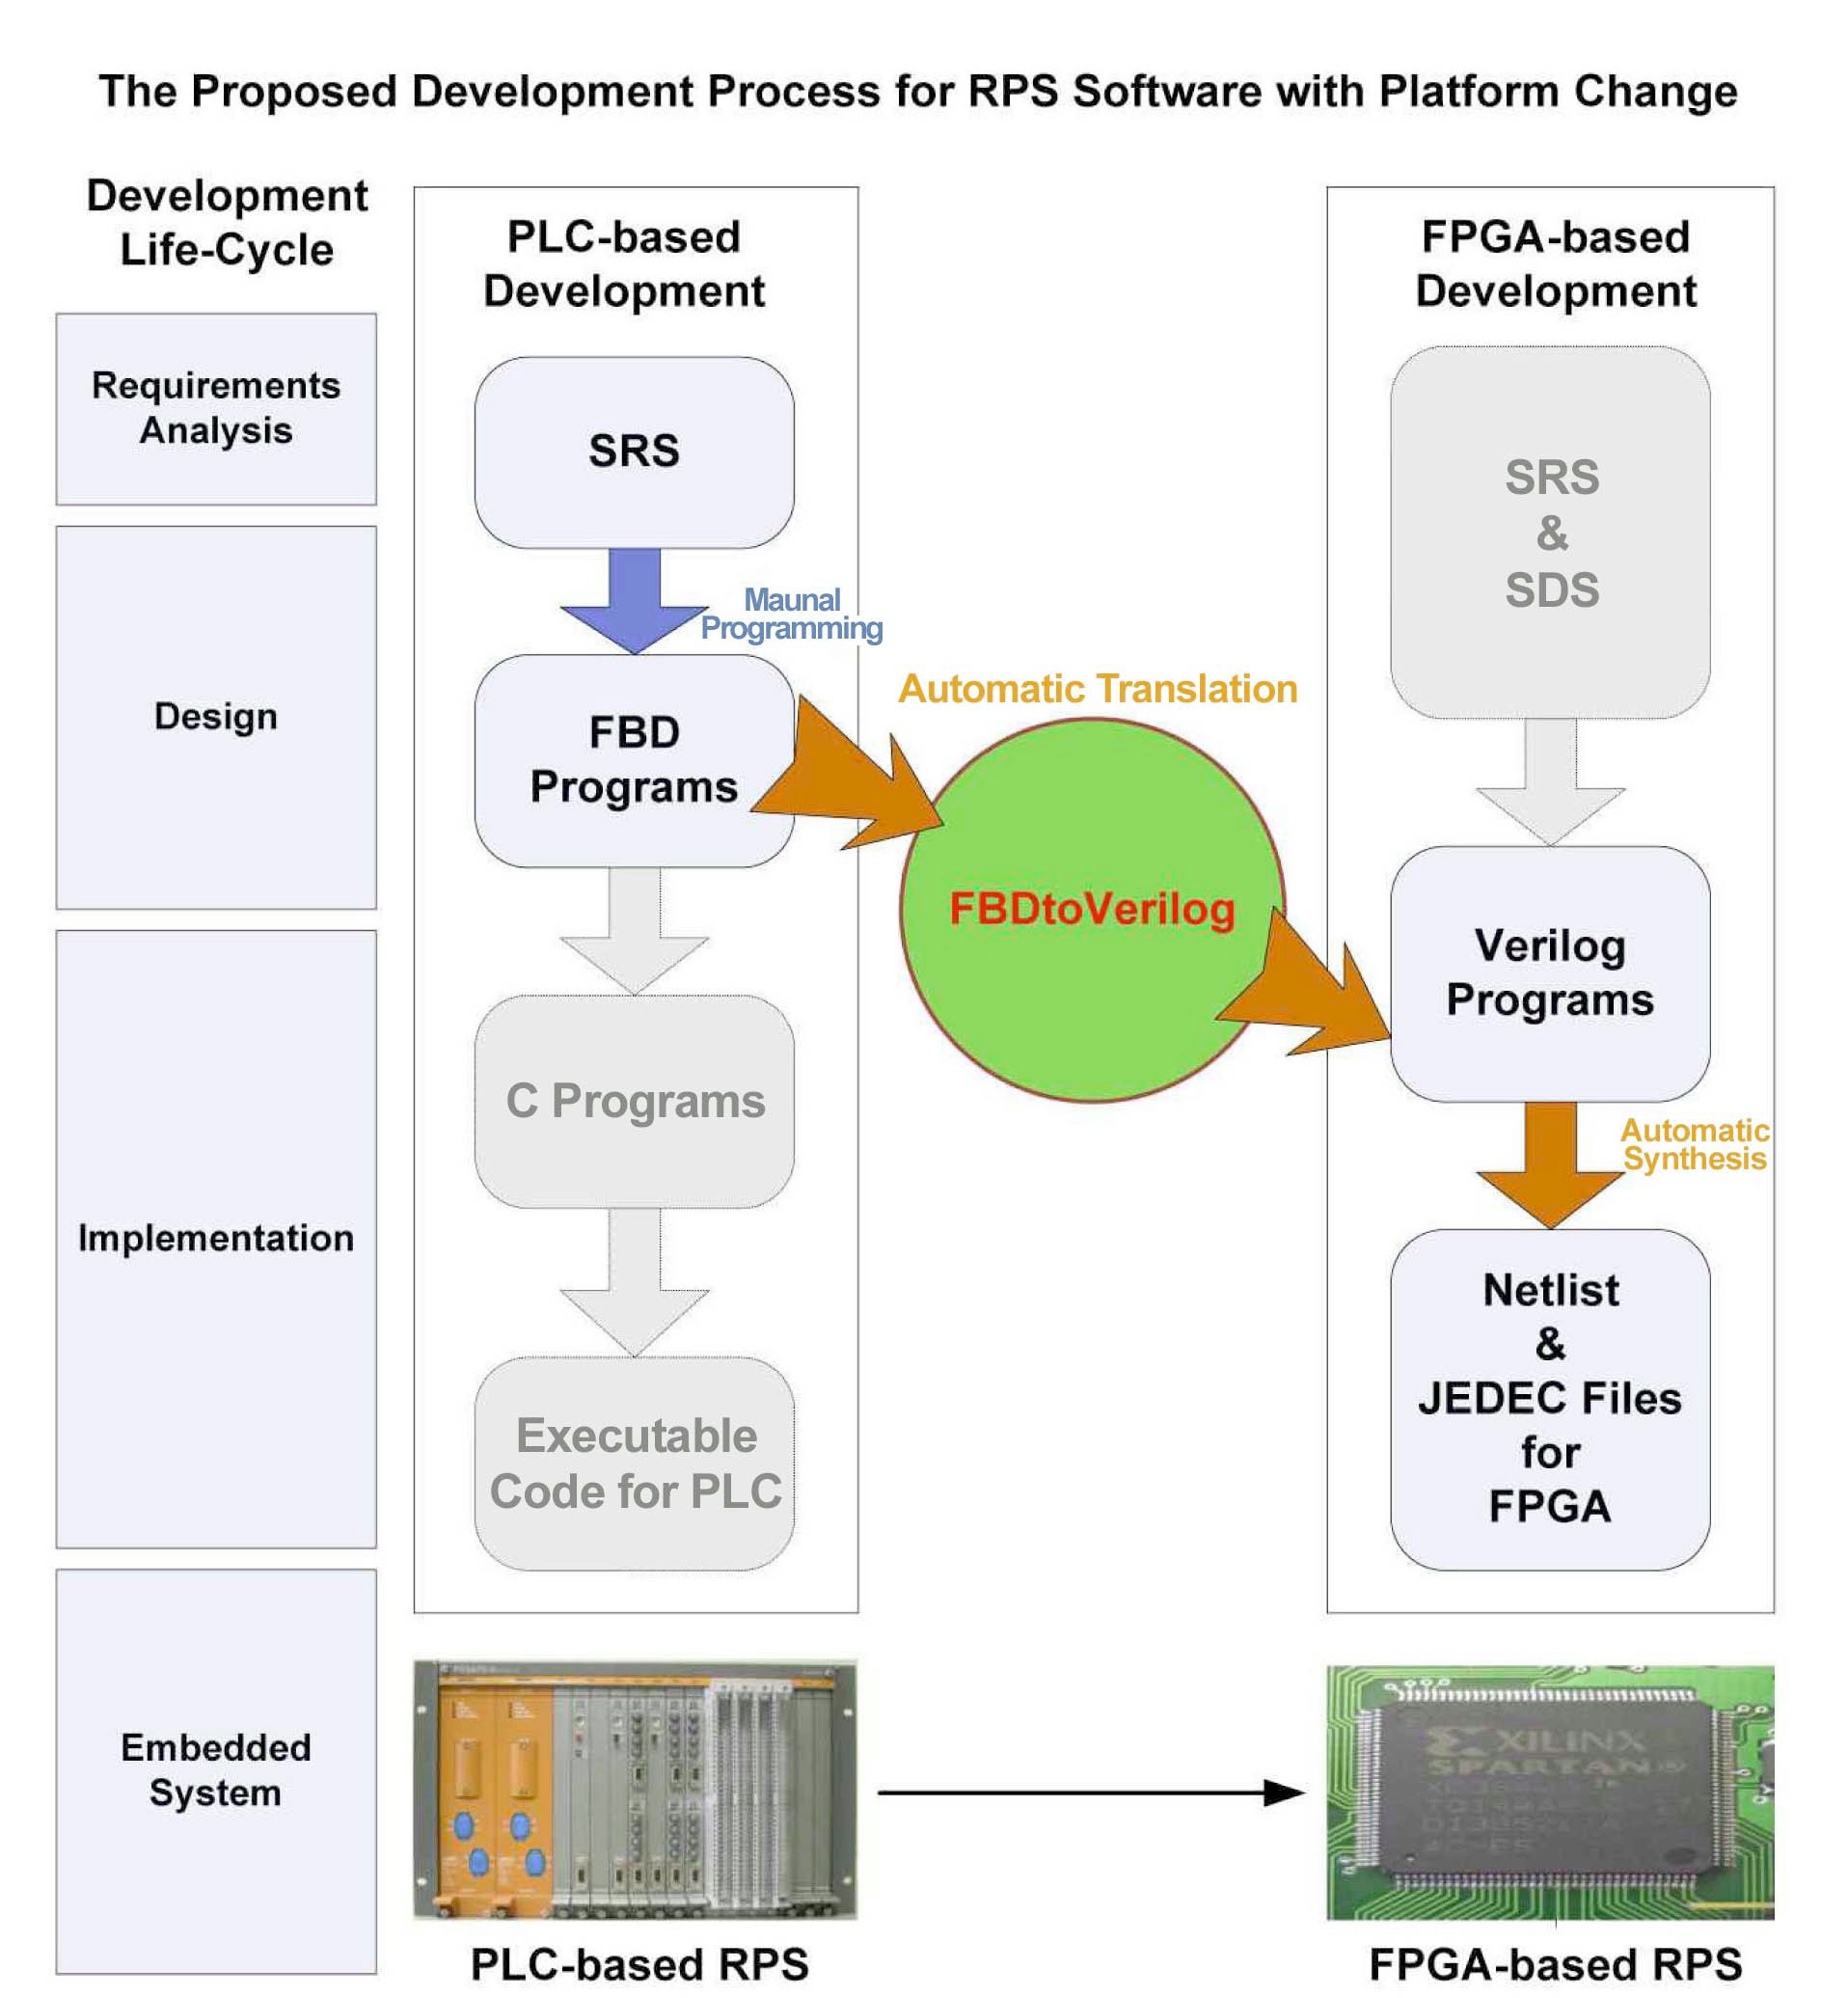 The Proposed RPS Software Development Process with Platform Change